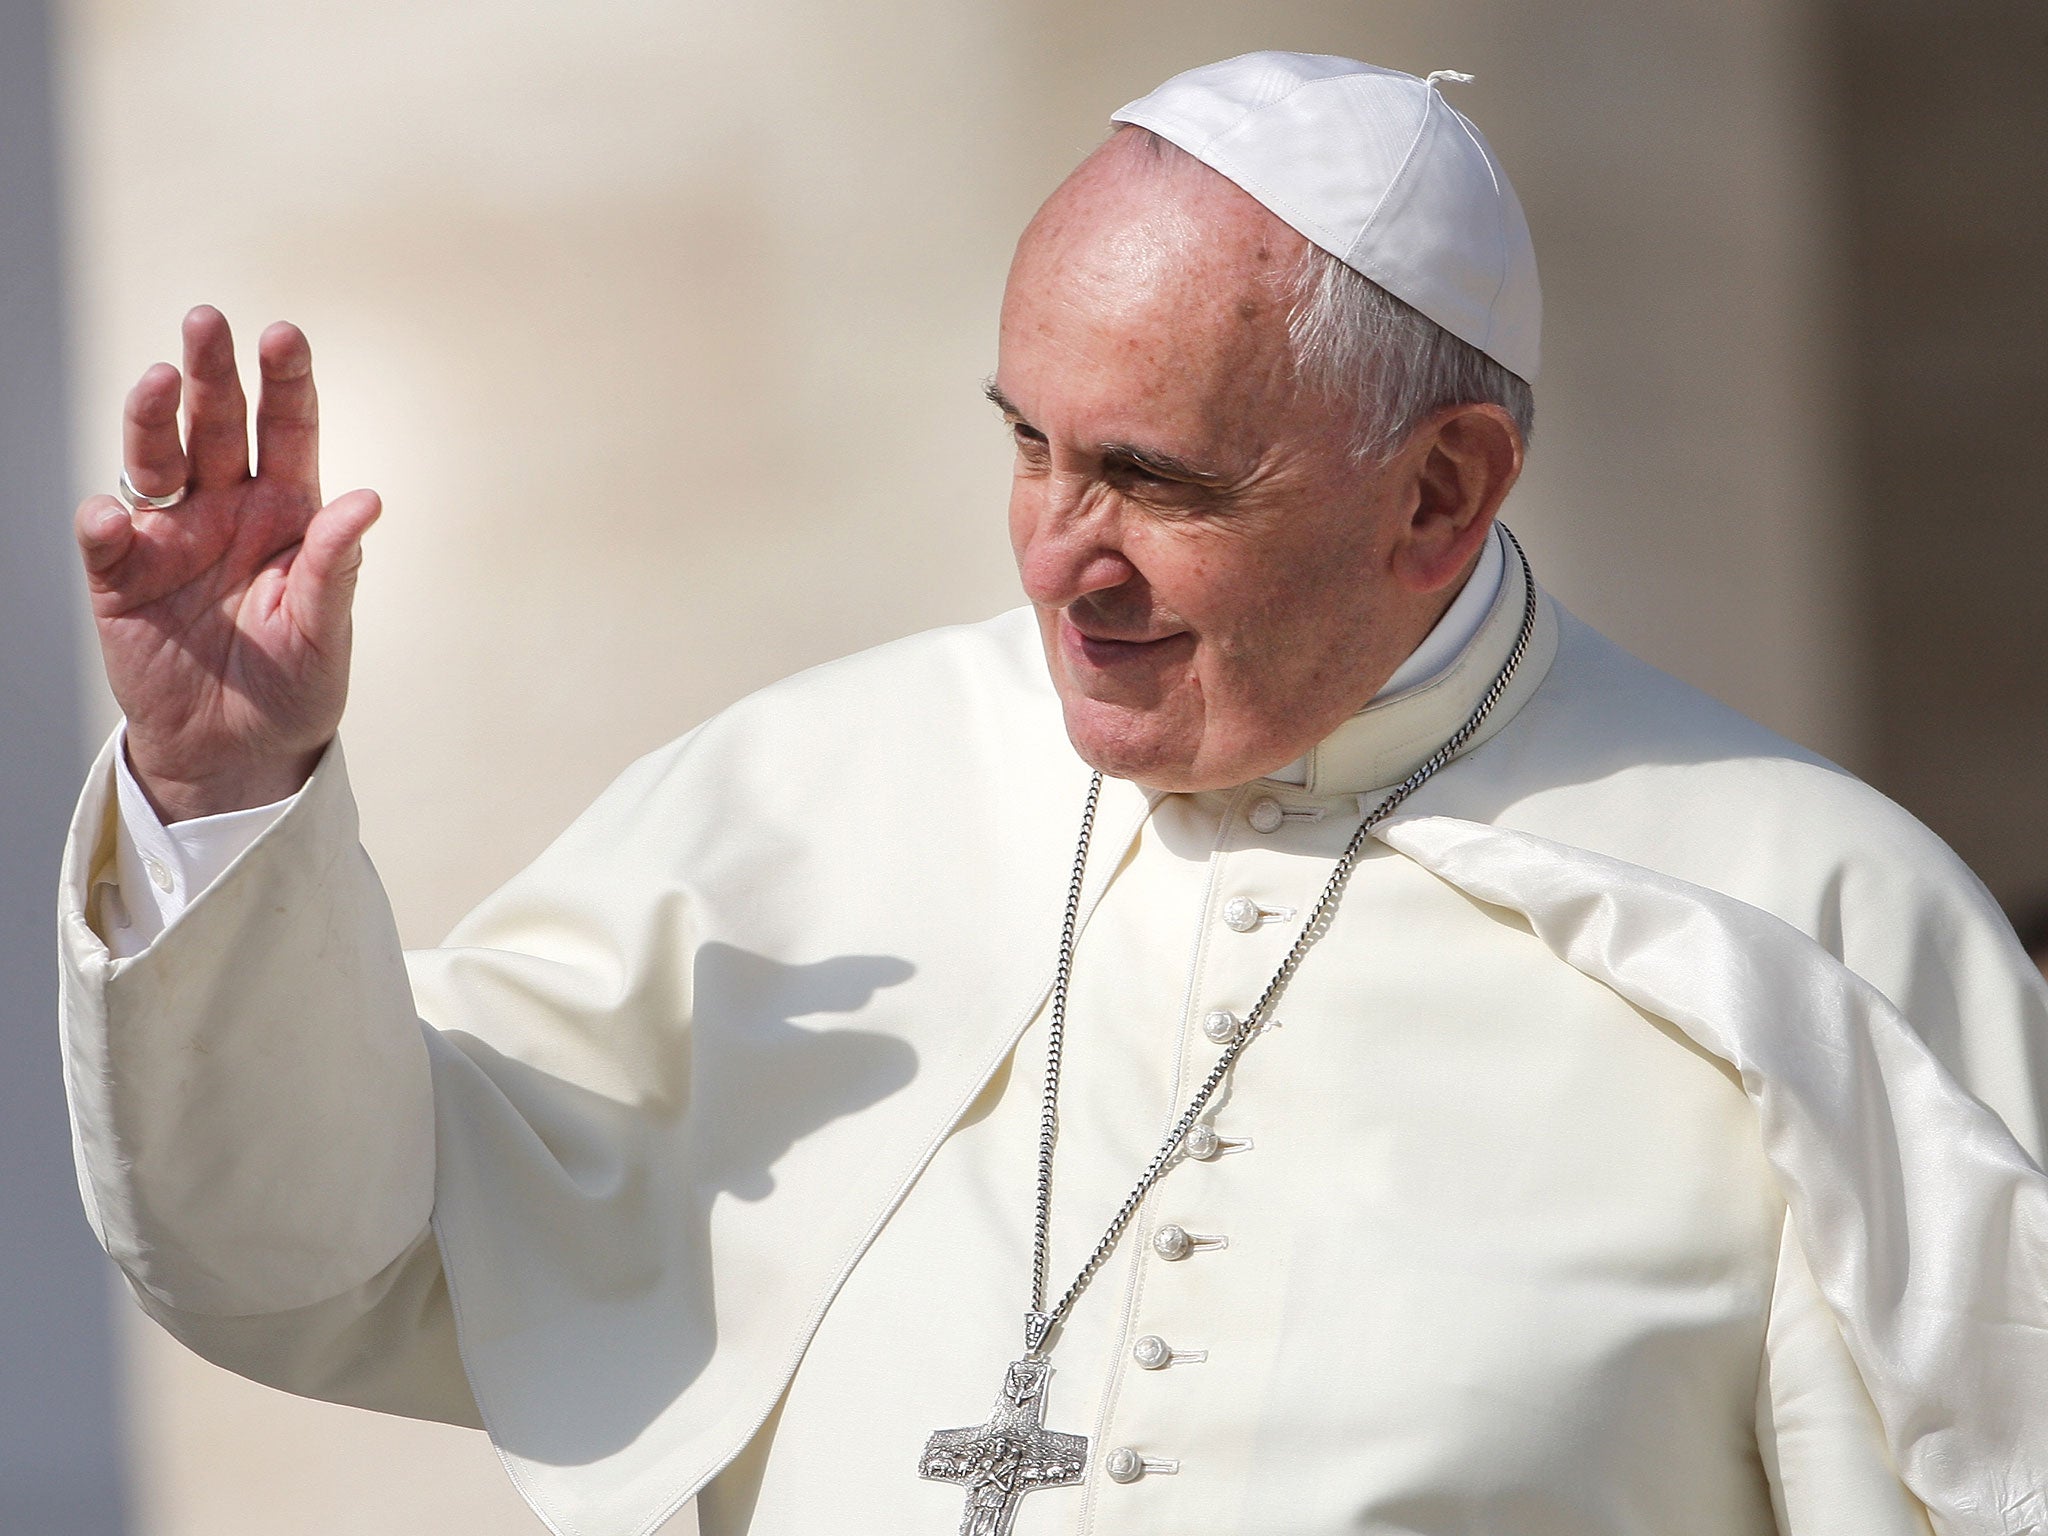 Pope Francis has reportedly praised exorcists